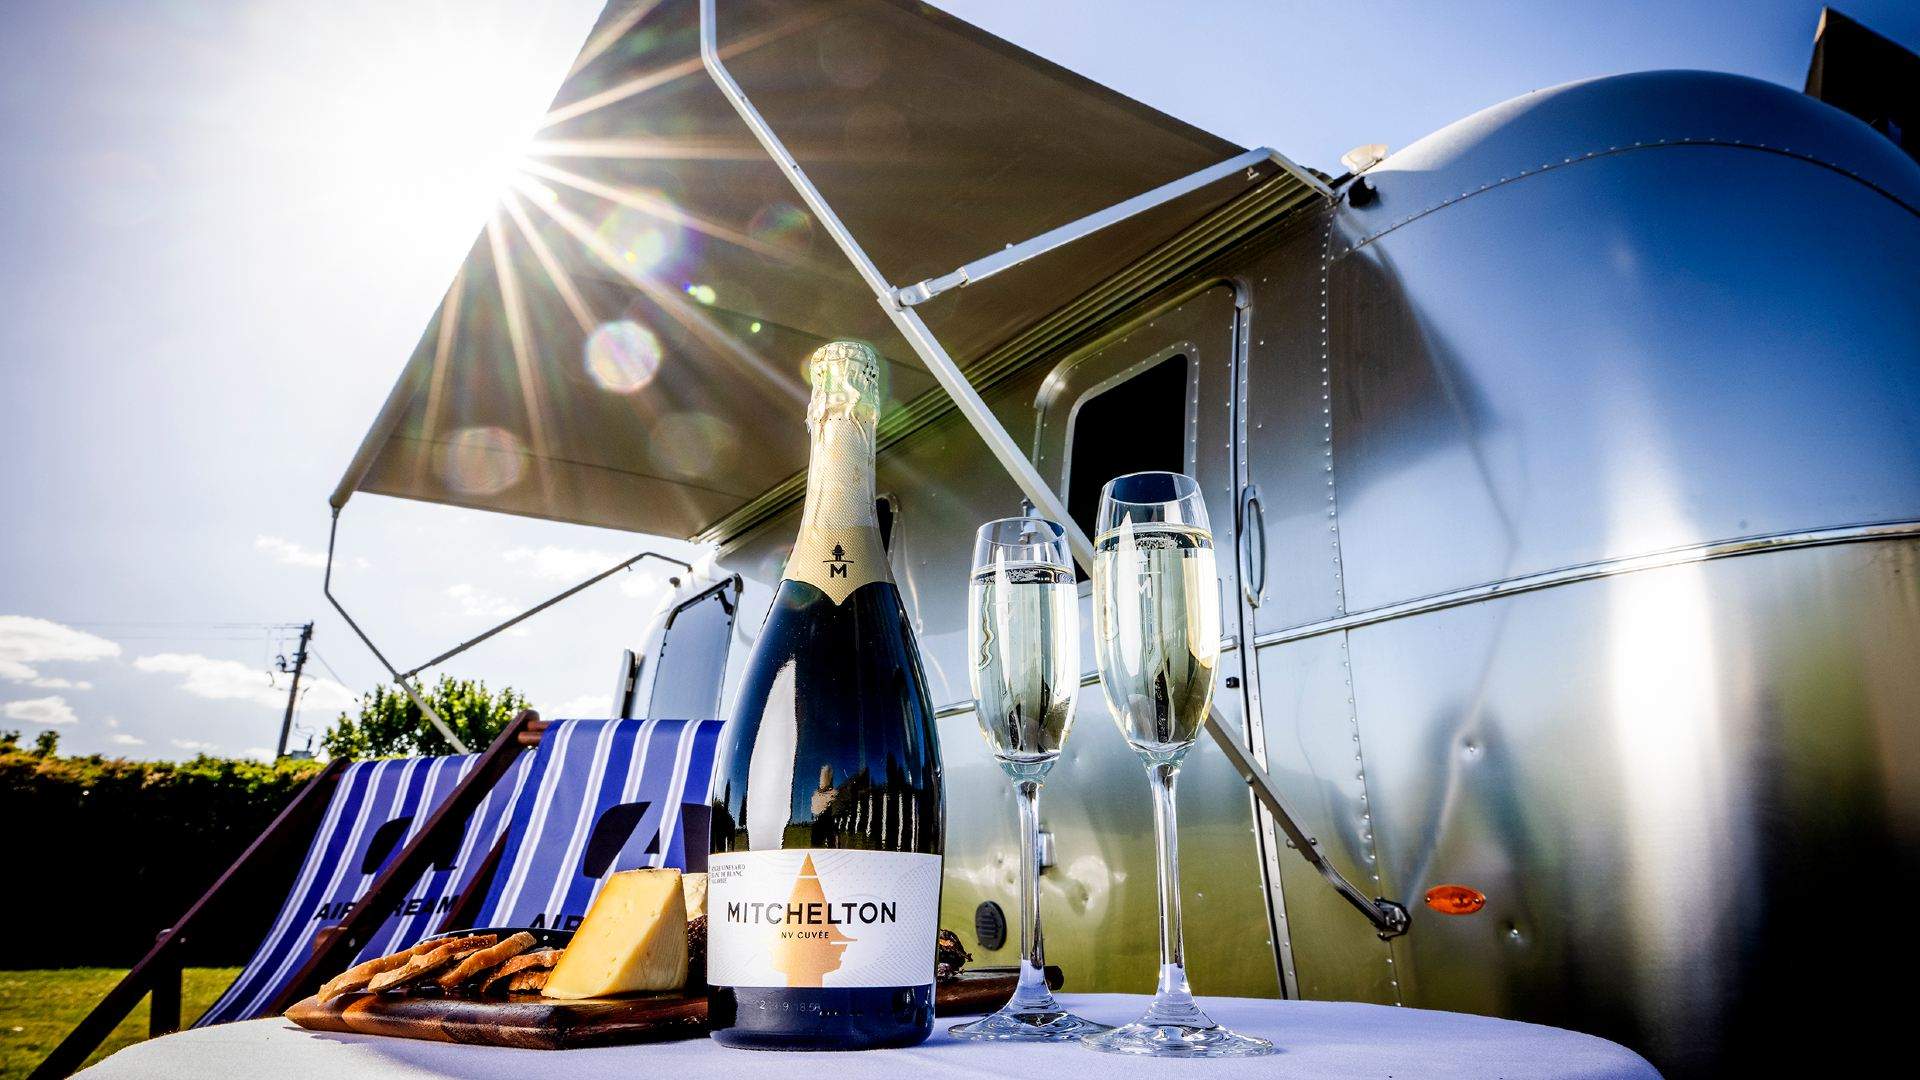 An Airstream Hotel Has Rolled Into Nagambie's Mitchelton Winery So You Can Sleep By the Vines